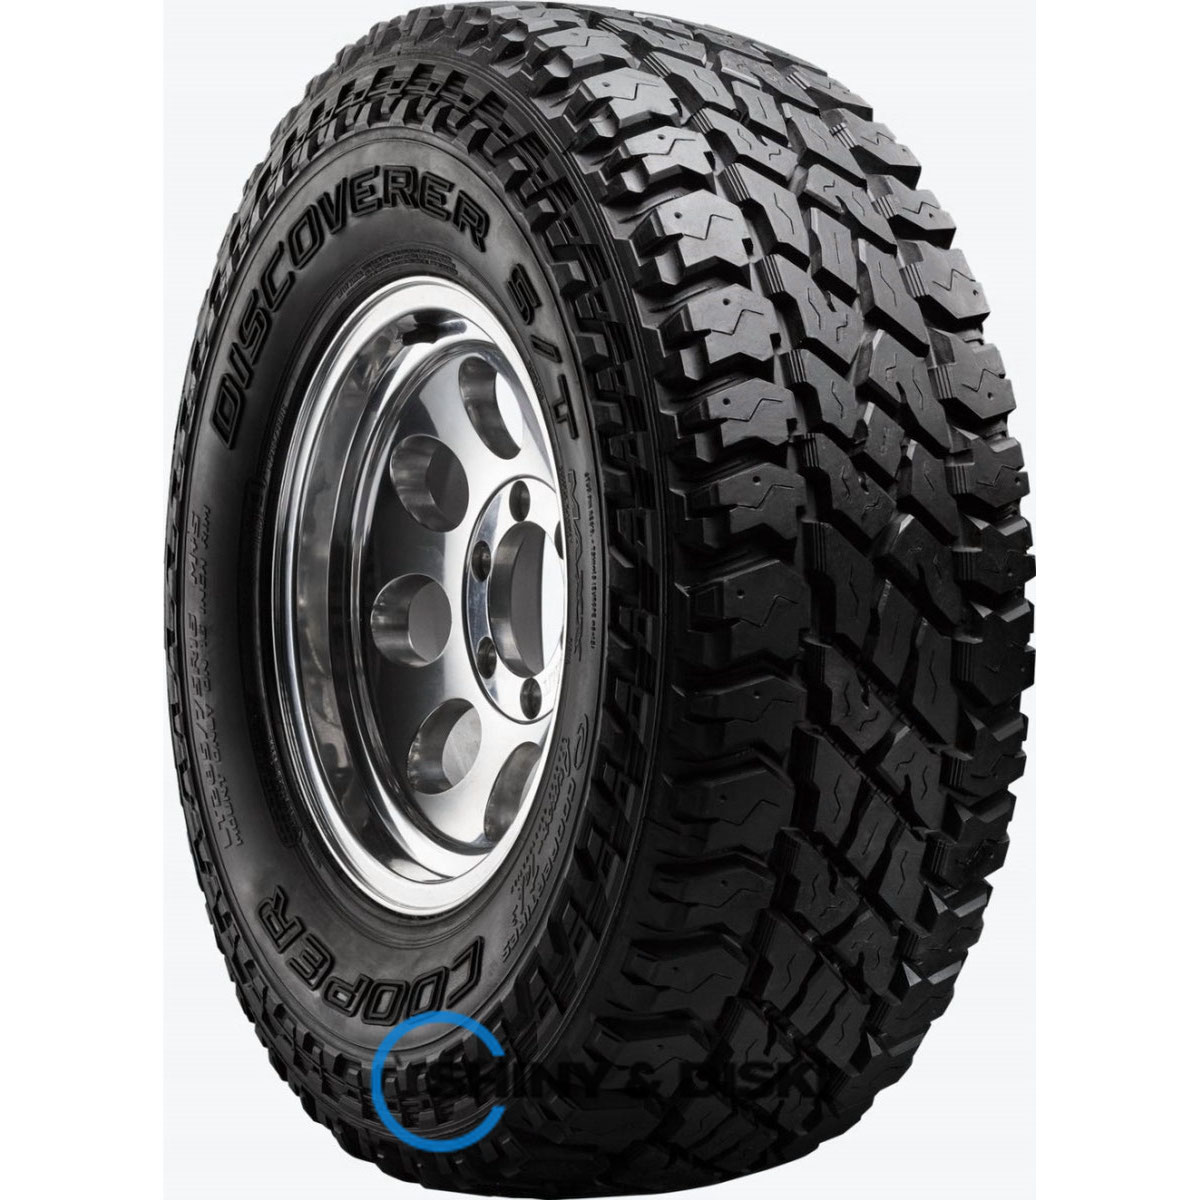 покрышки cooper discoverer s/t maxx 215/85 r16 115/112q